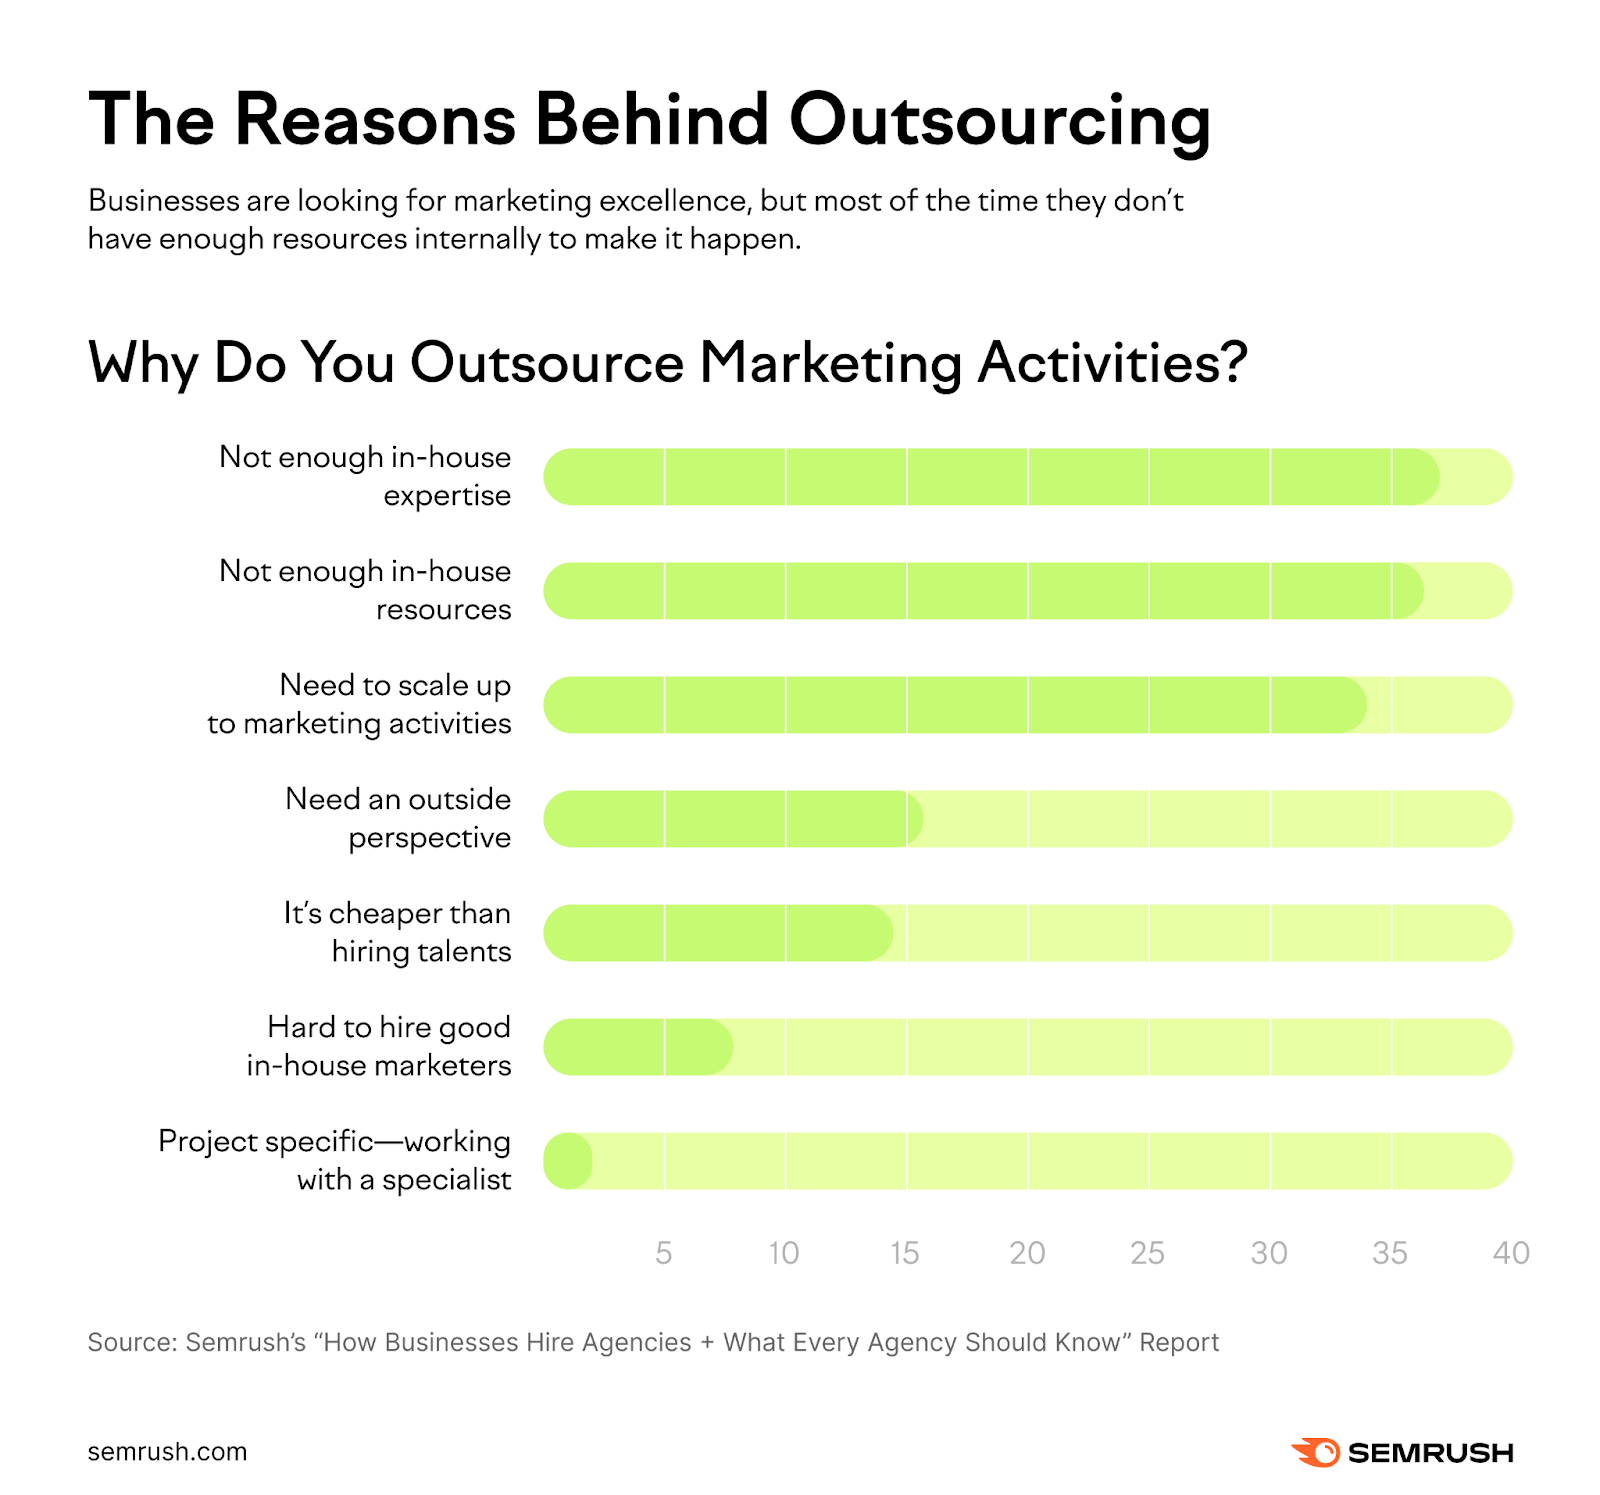 An infographic showing the results for "Why do you outsource marketing activities?" question from the study